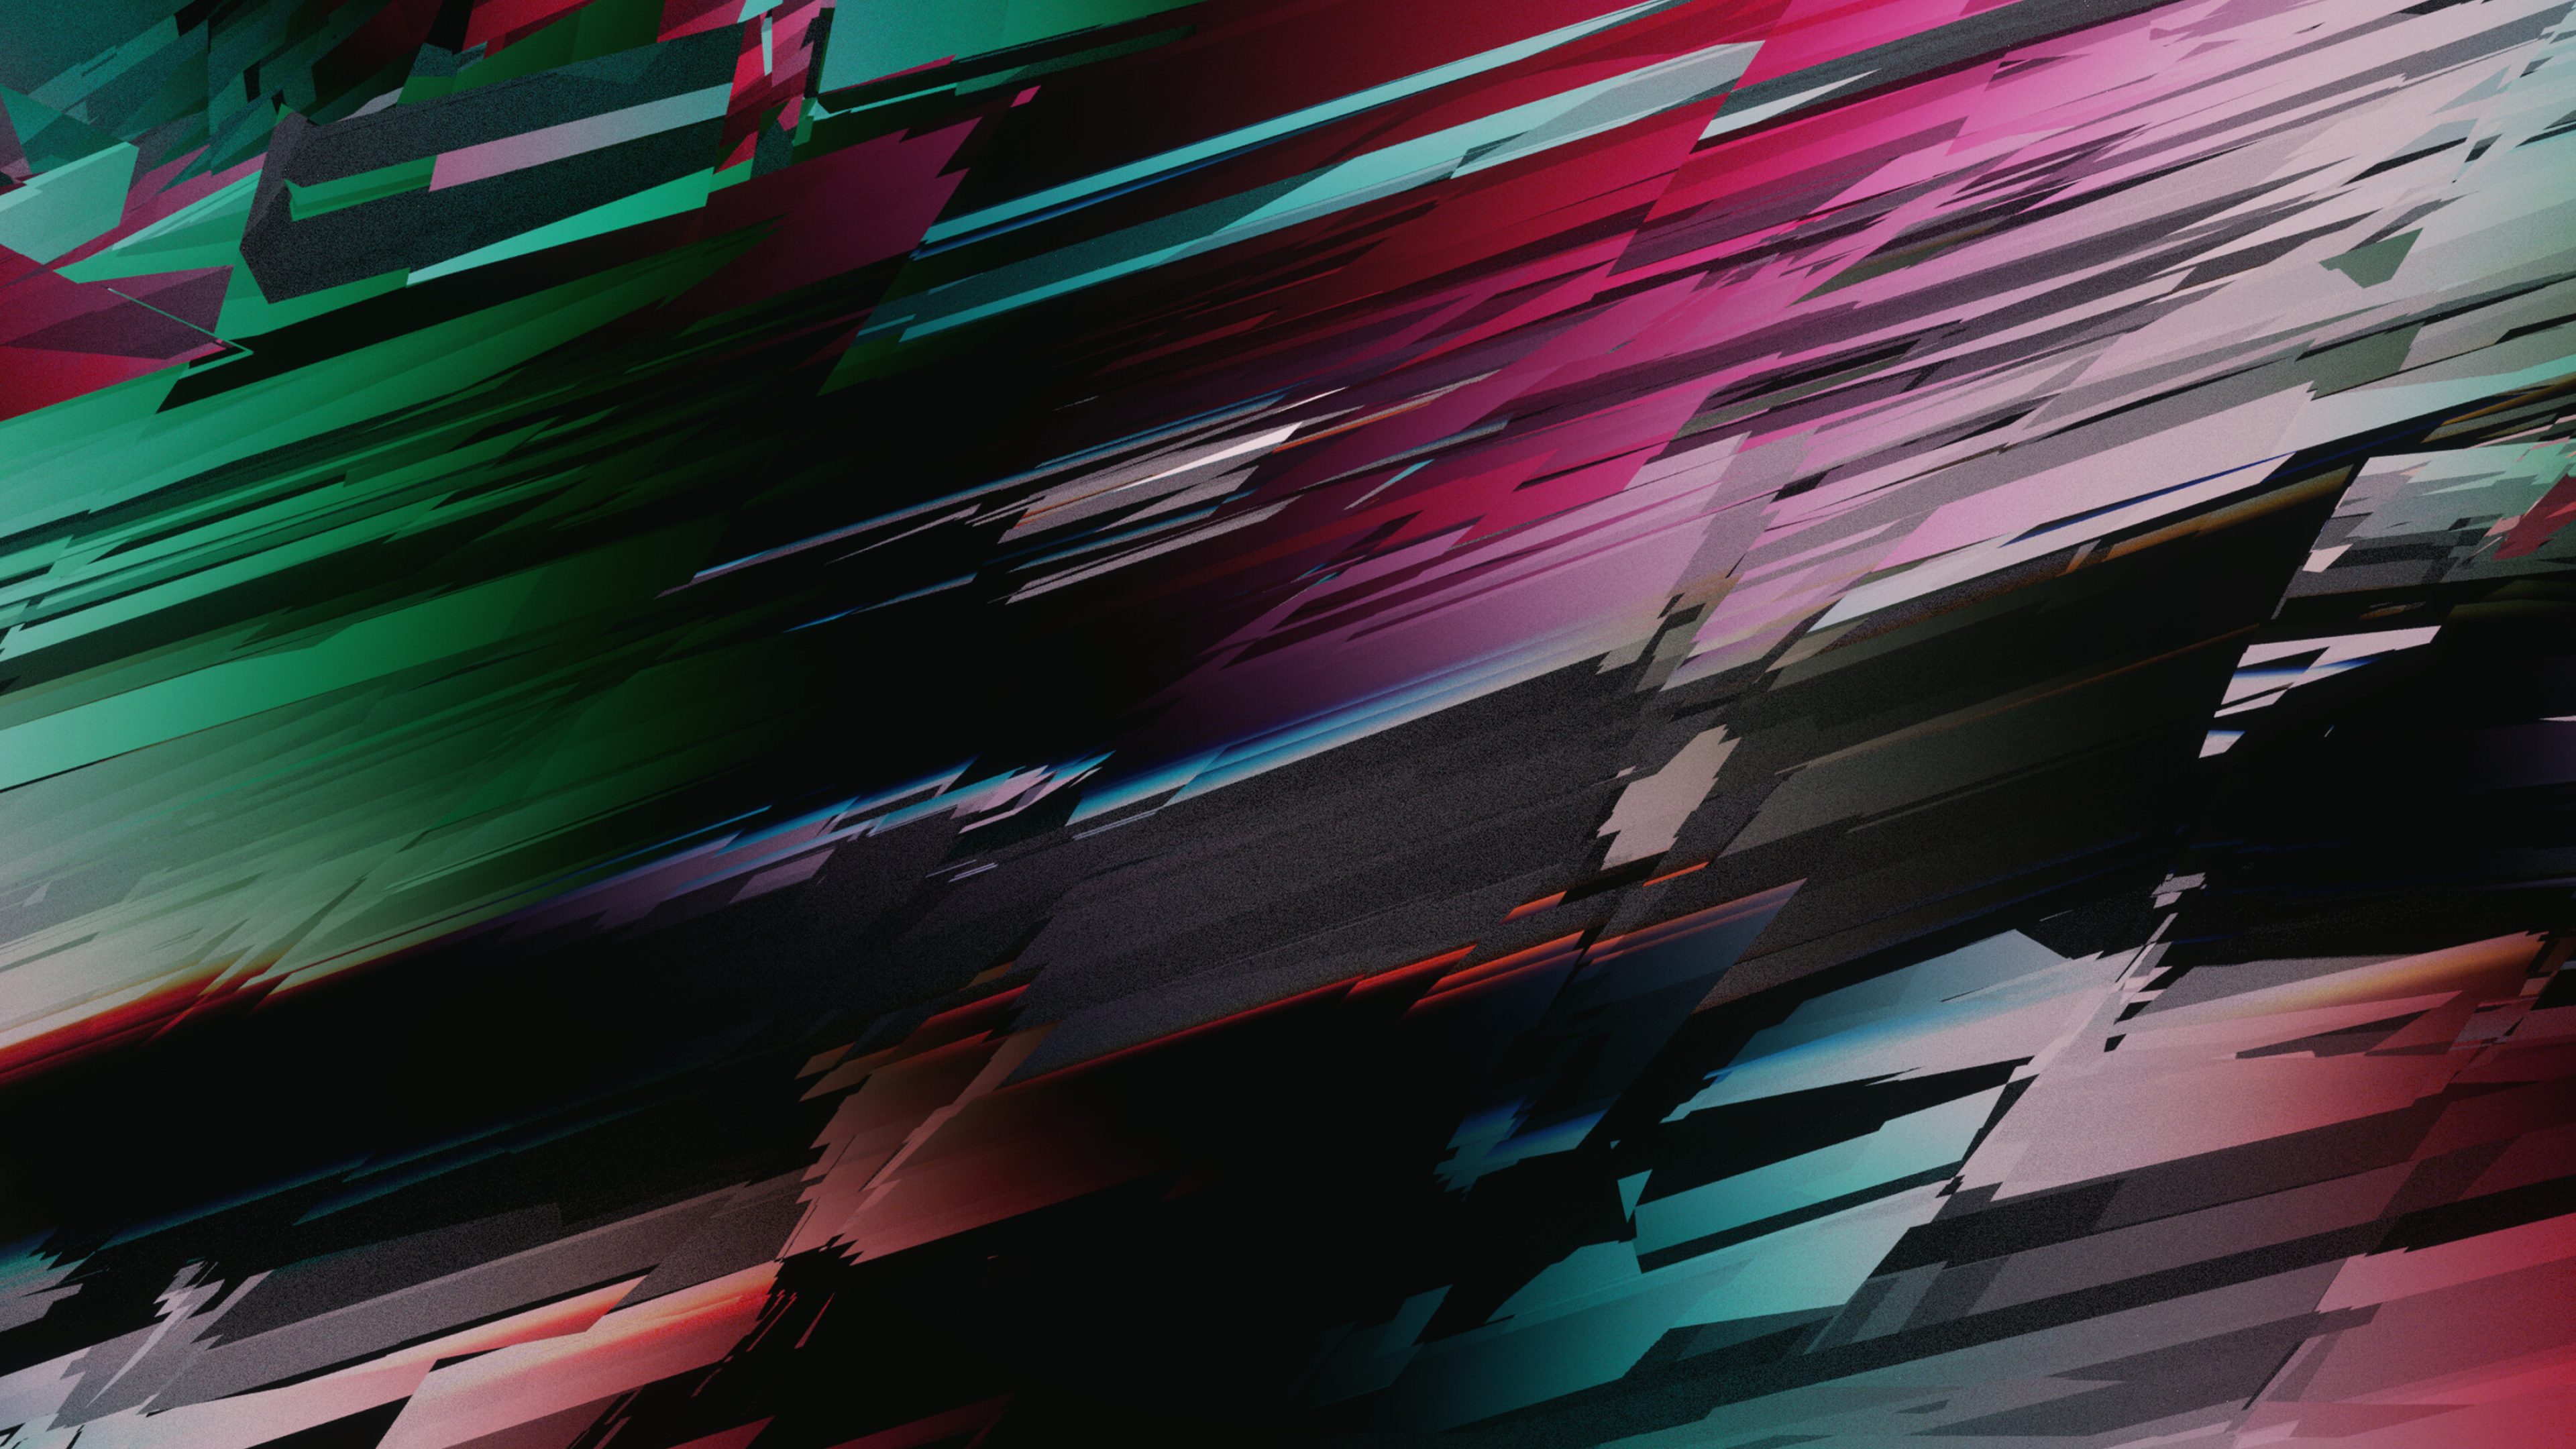 Glitch: Art, The failure of a system to complete its functions or to perform them properly. 3840x2160 4K Wallpaper.